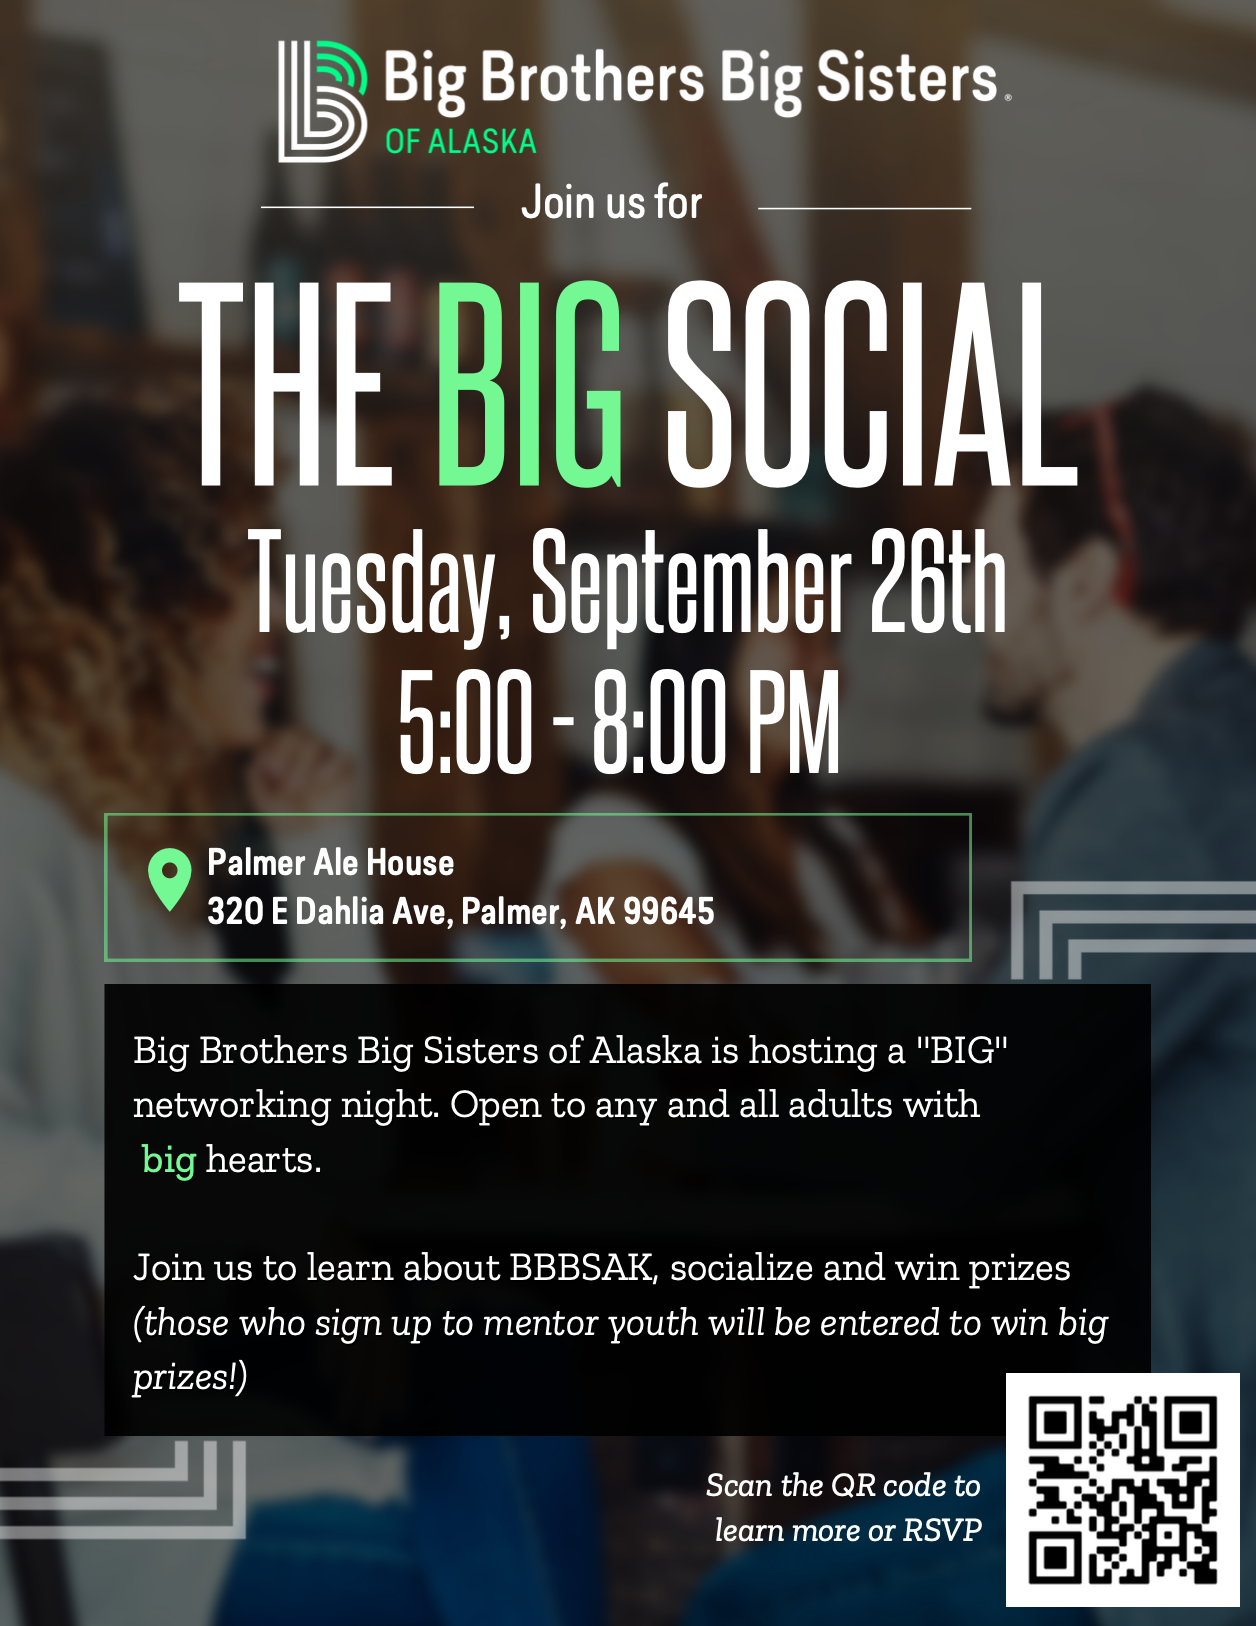 Networking night for big brother big sister program. Hosted at Palmer Alehouse.